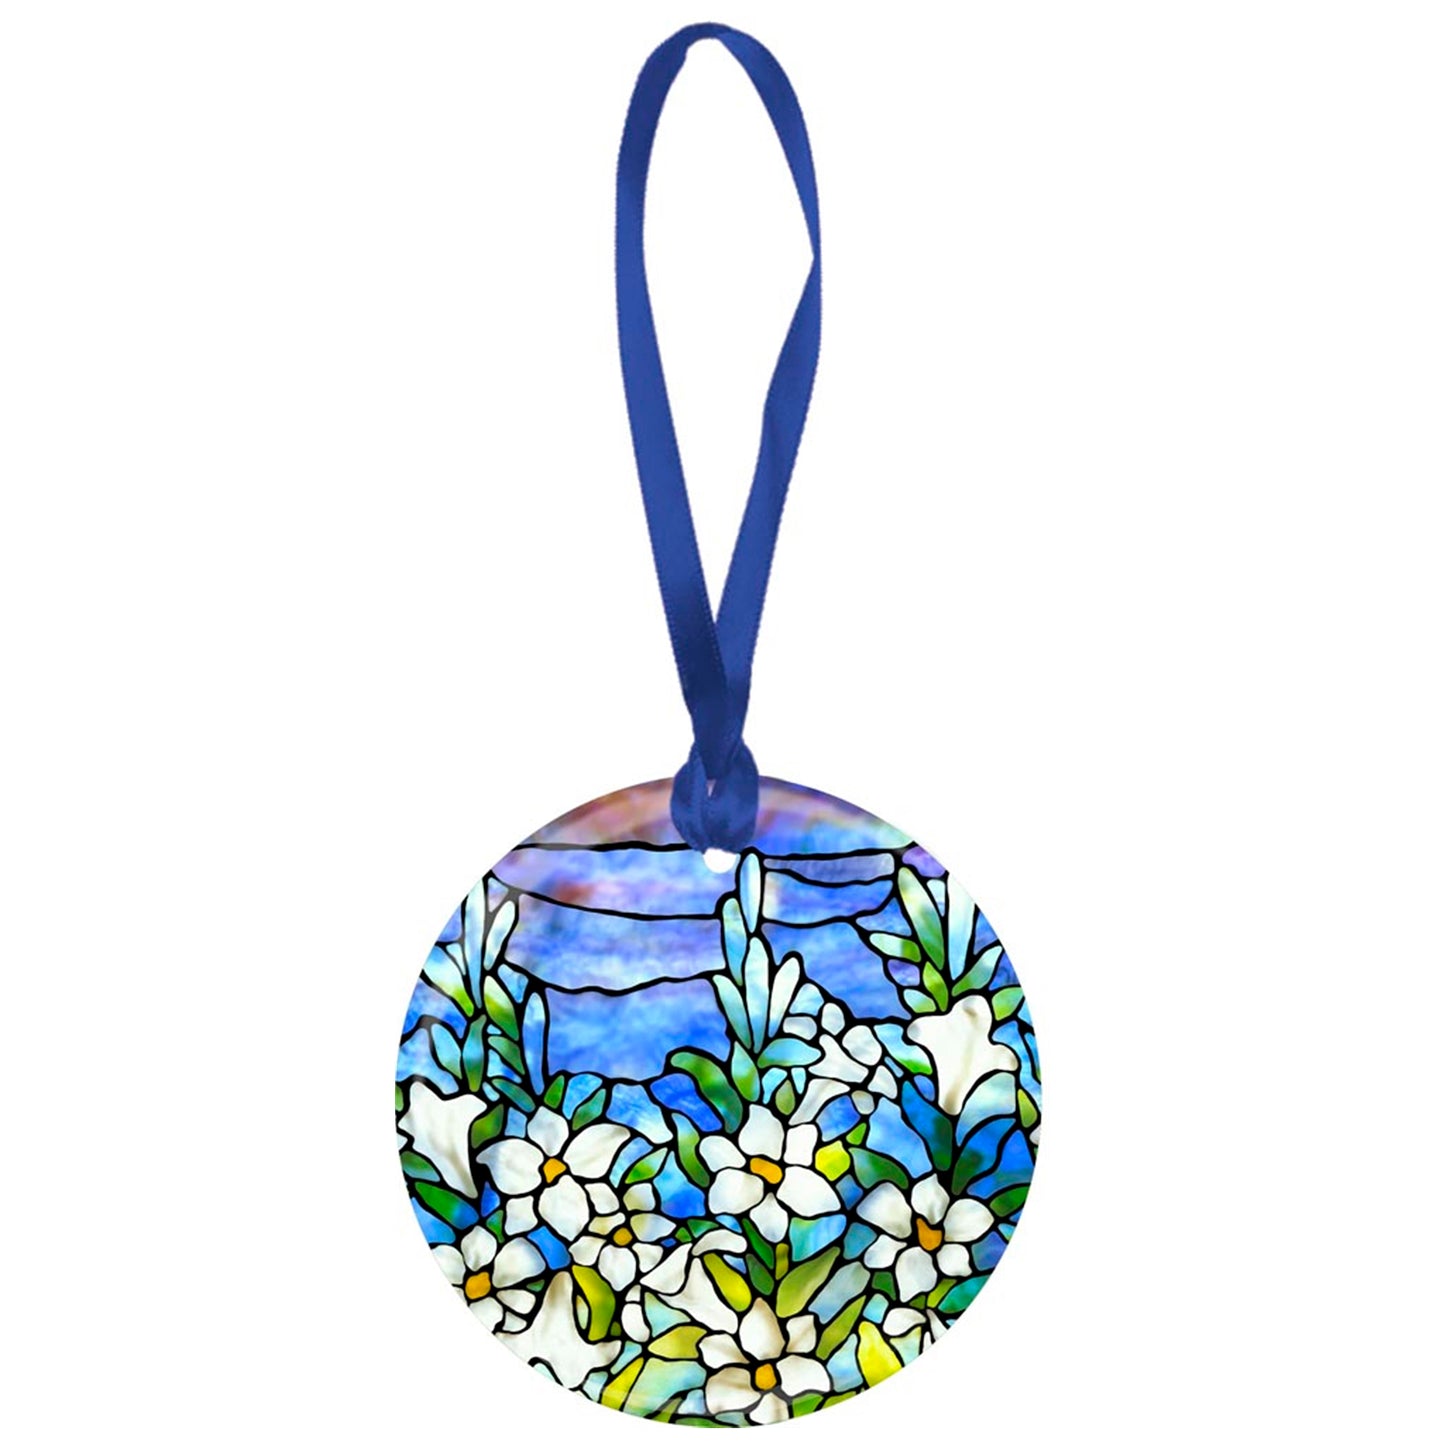 Tiffany's "Field of Lilies" Porcelain Ornament